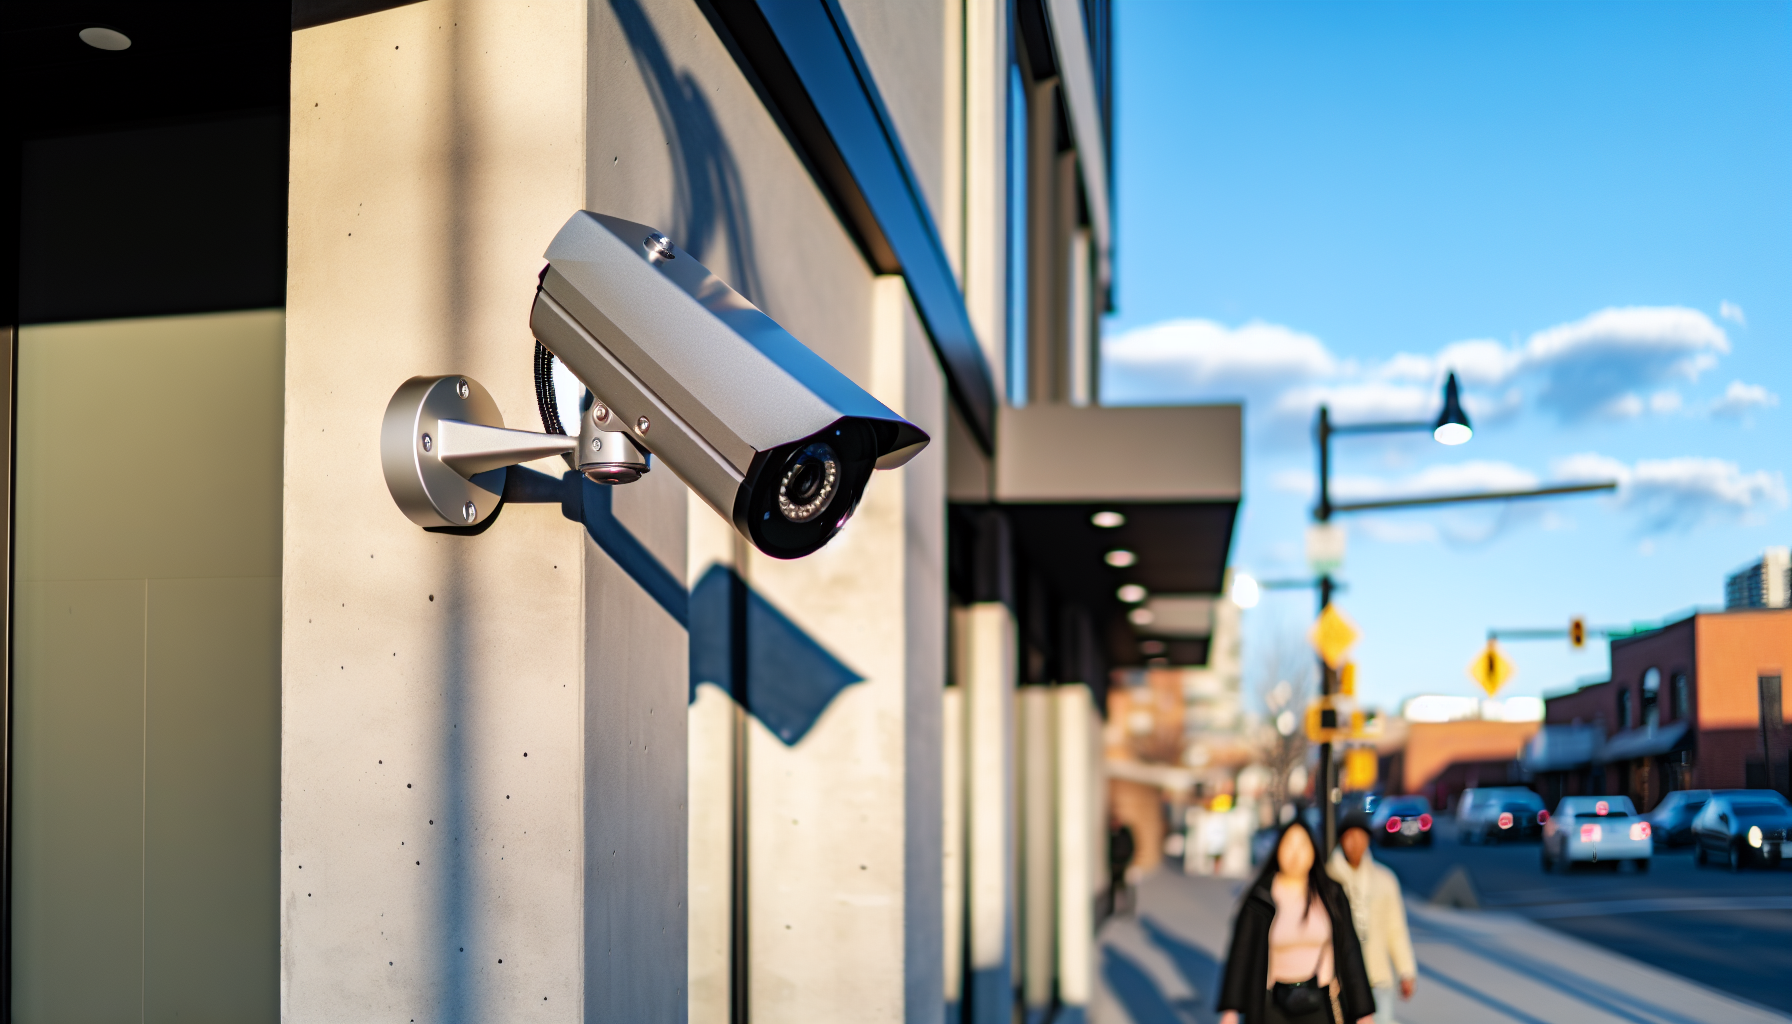 A blurred image of a security camera monitoring a business location